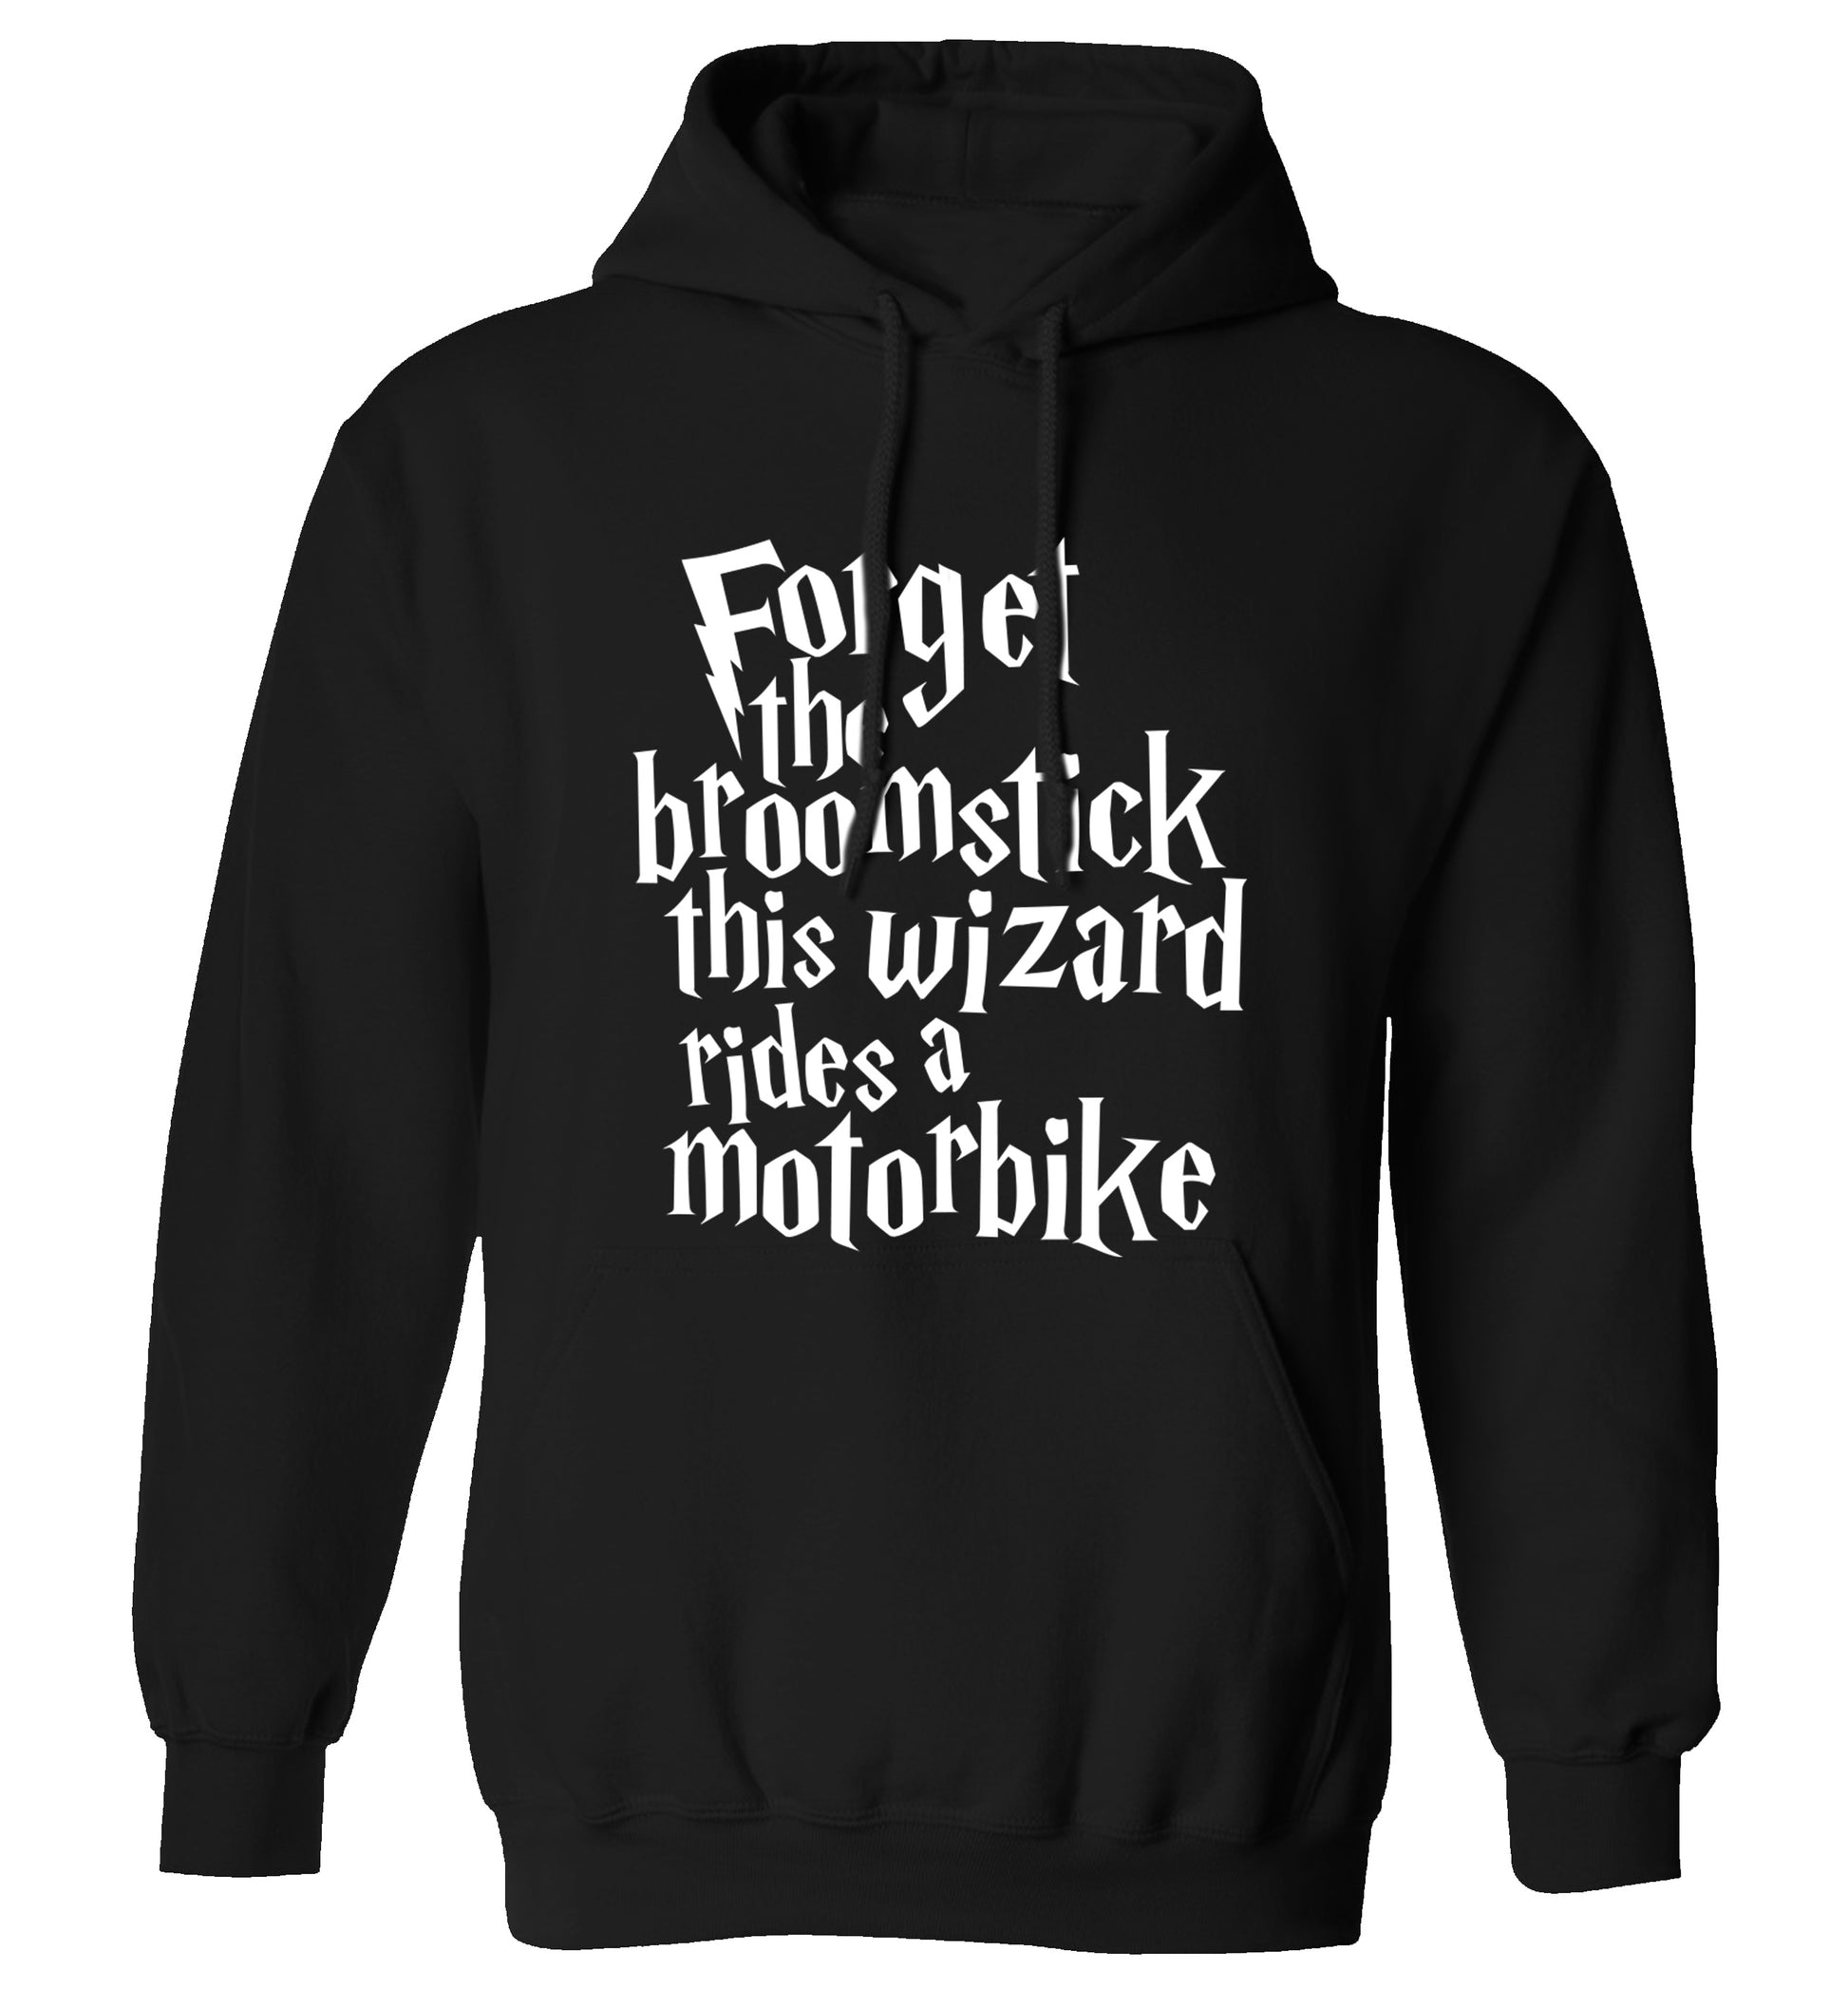 Forget the broomstick this wizard rides a motorbike adults unisexblack hoodie 2XL